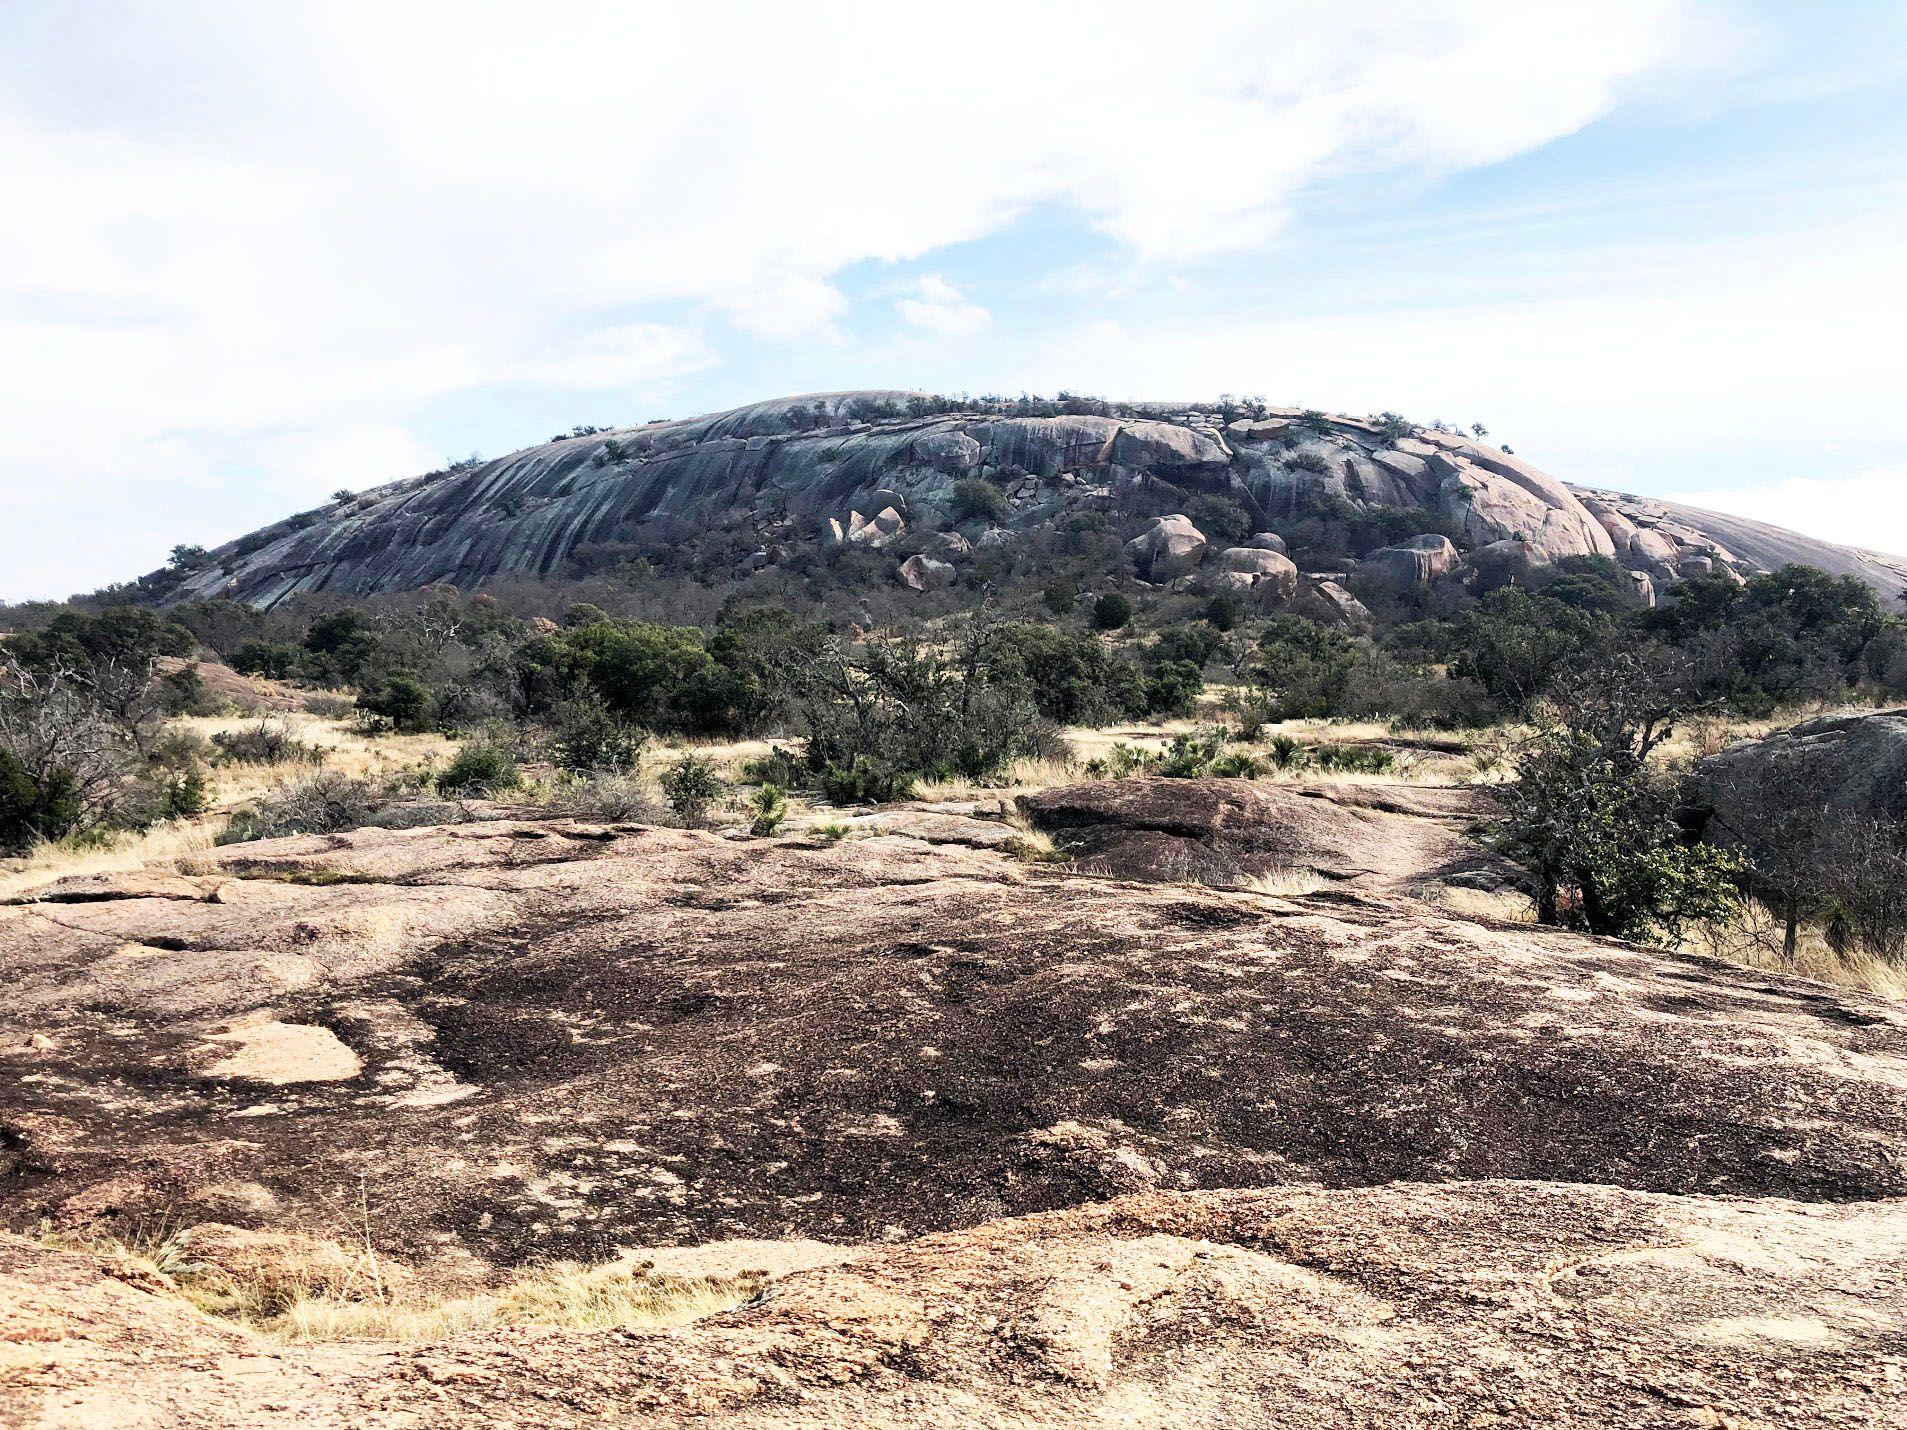 A landscape view of the entire Enchanted Rock.